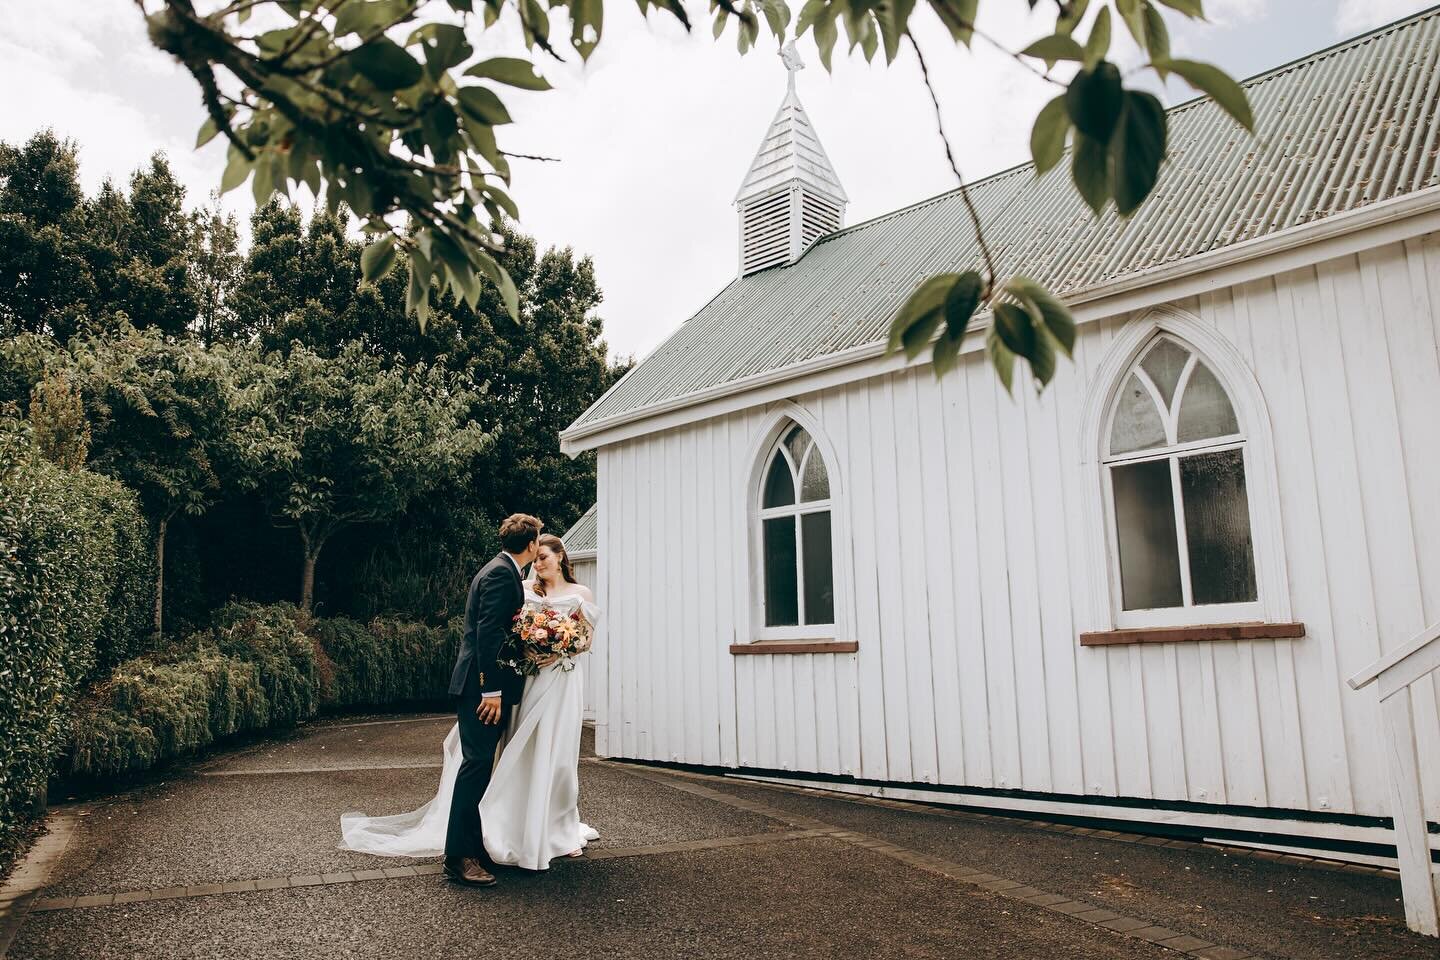 I really like small chapel wedding 💒, it&rsquo;s indoor, you don&rsquo;t have to worry about the weather. Small space to create the intimacy. Beautiful and have it&rsquo;s own history 

Location: Holy trinity church, Silverdale